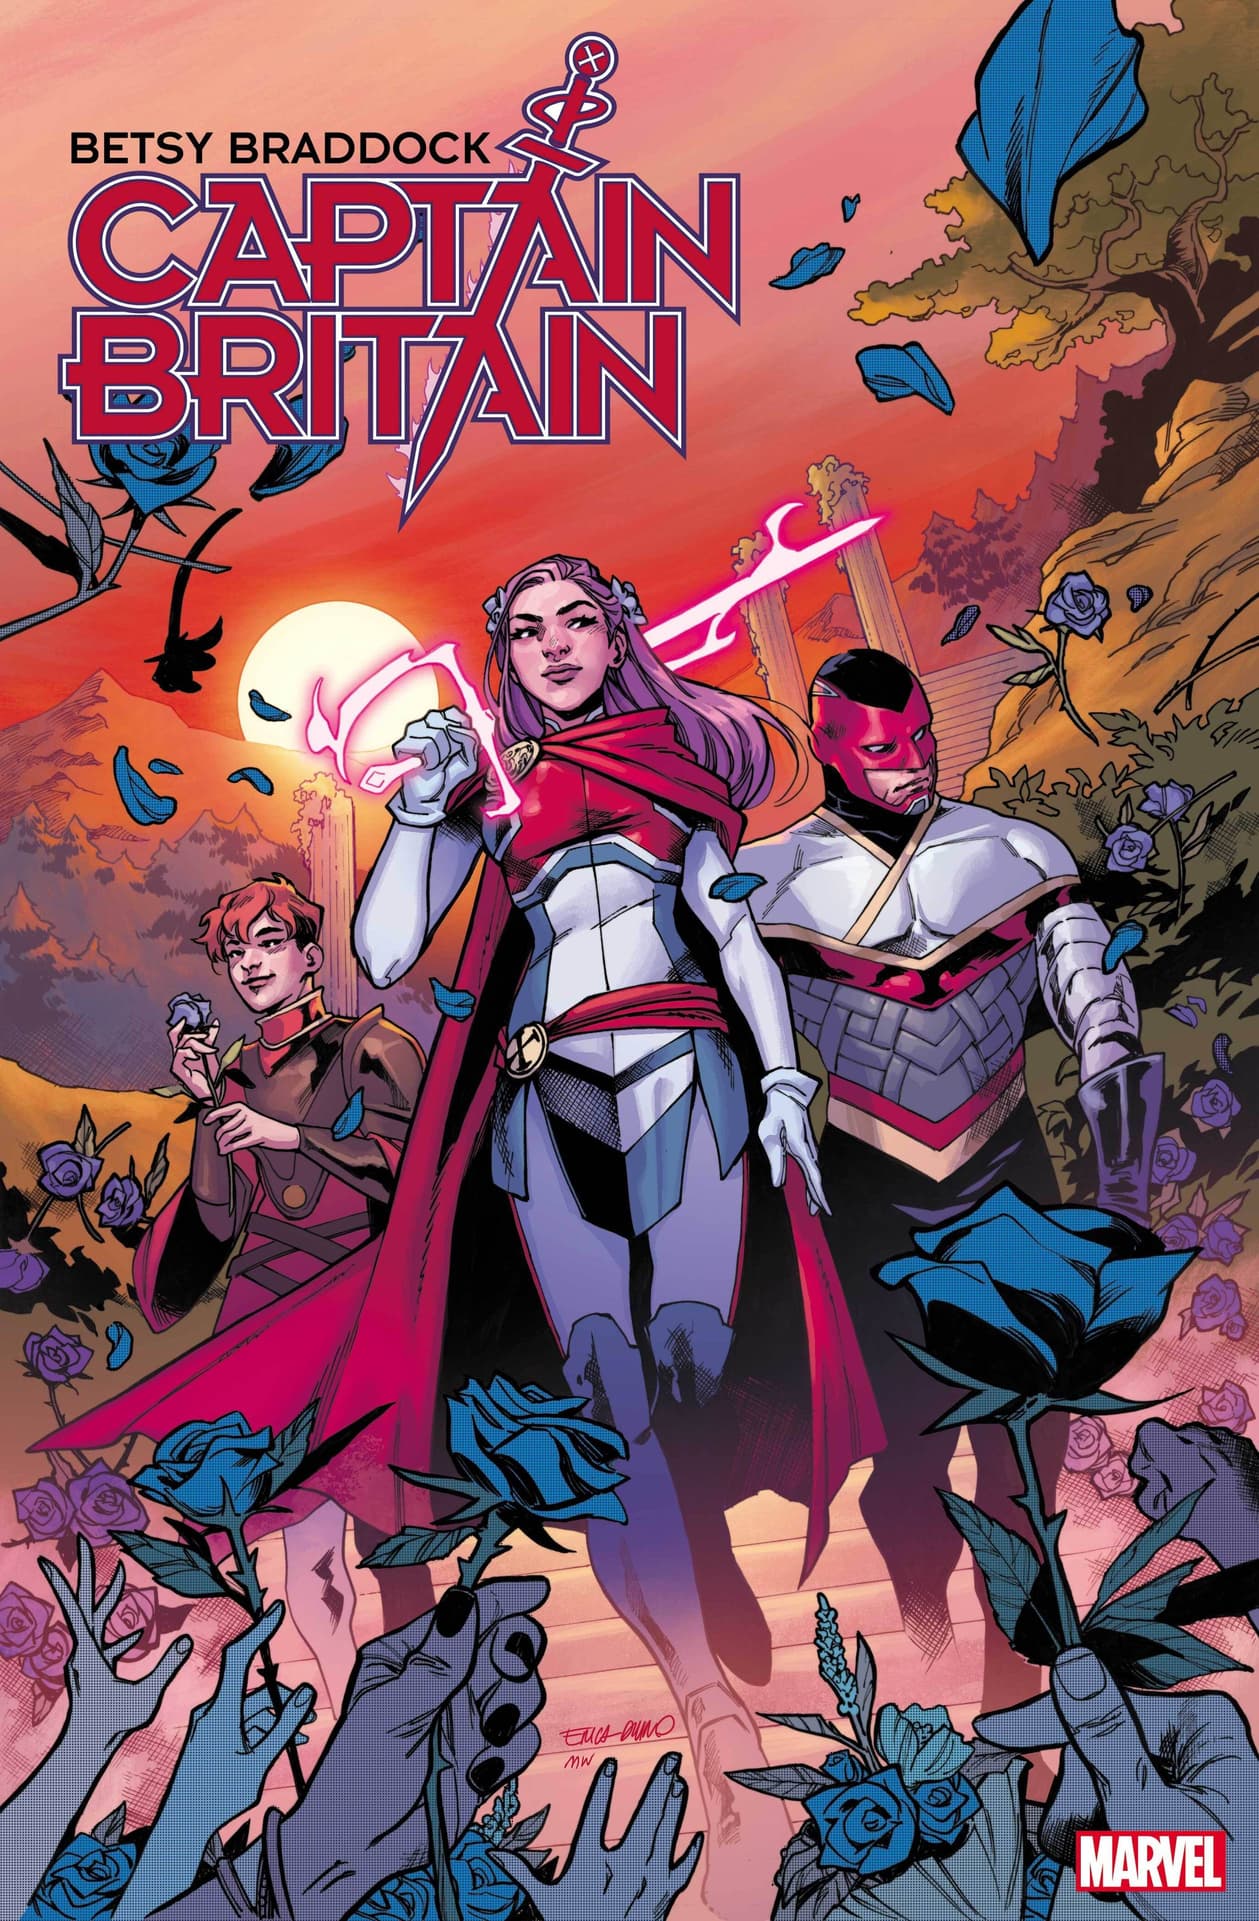 BETSY BRADDOCK: CAPTAIN BRITAIN #1 cover by Erica D’Urso